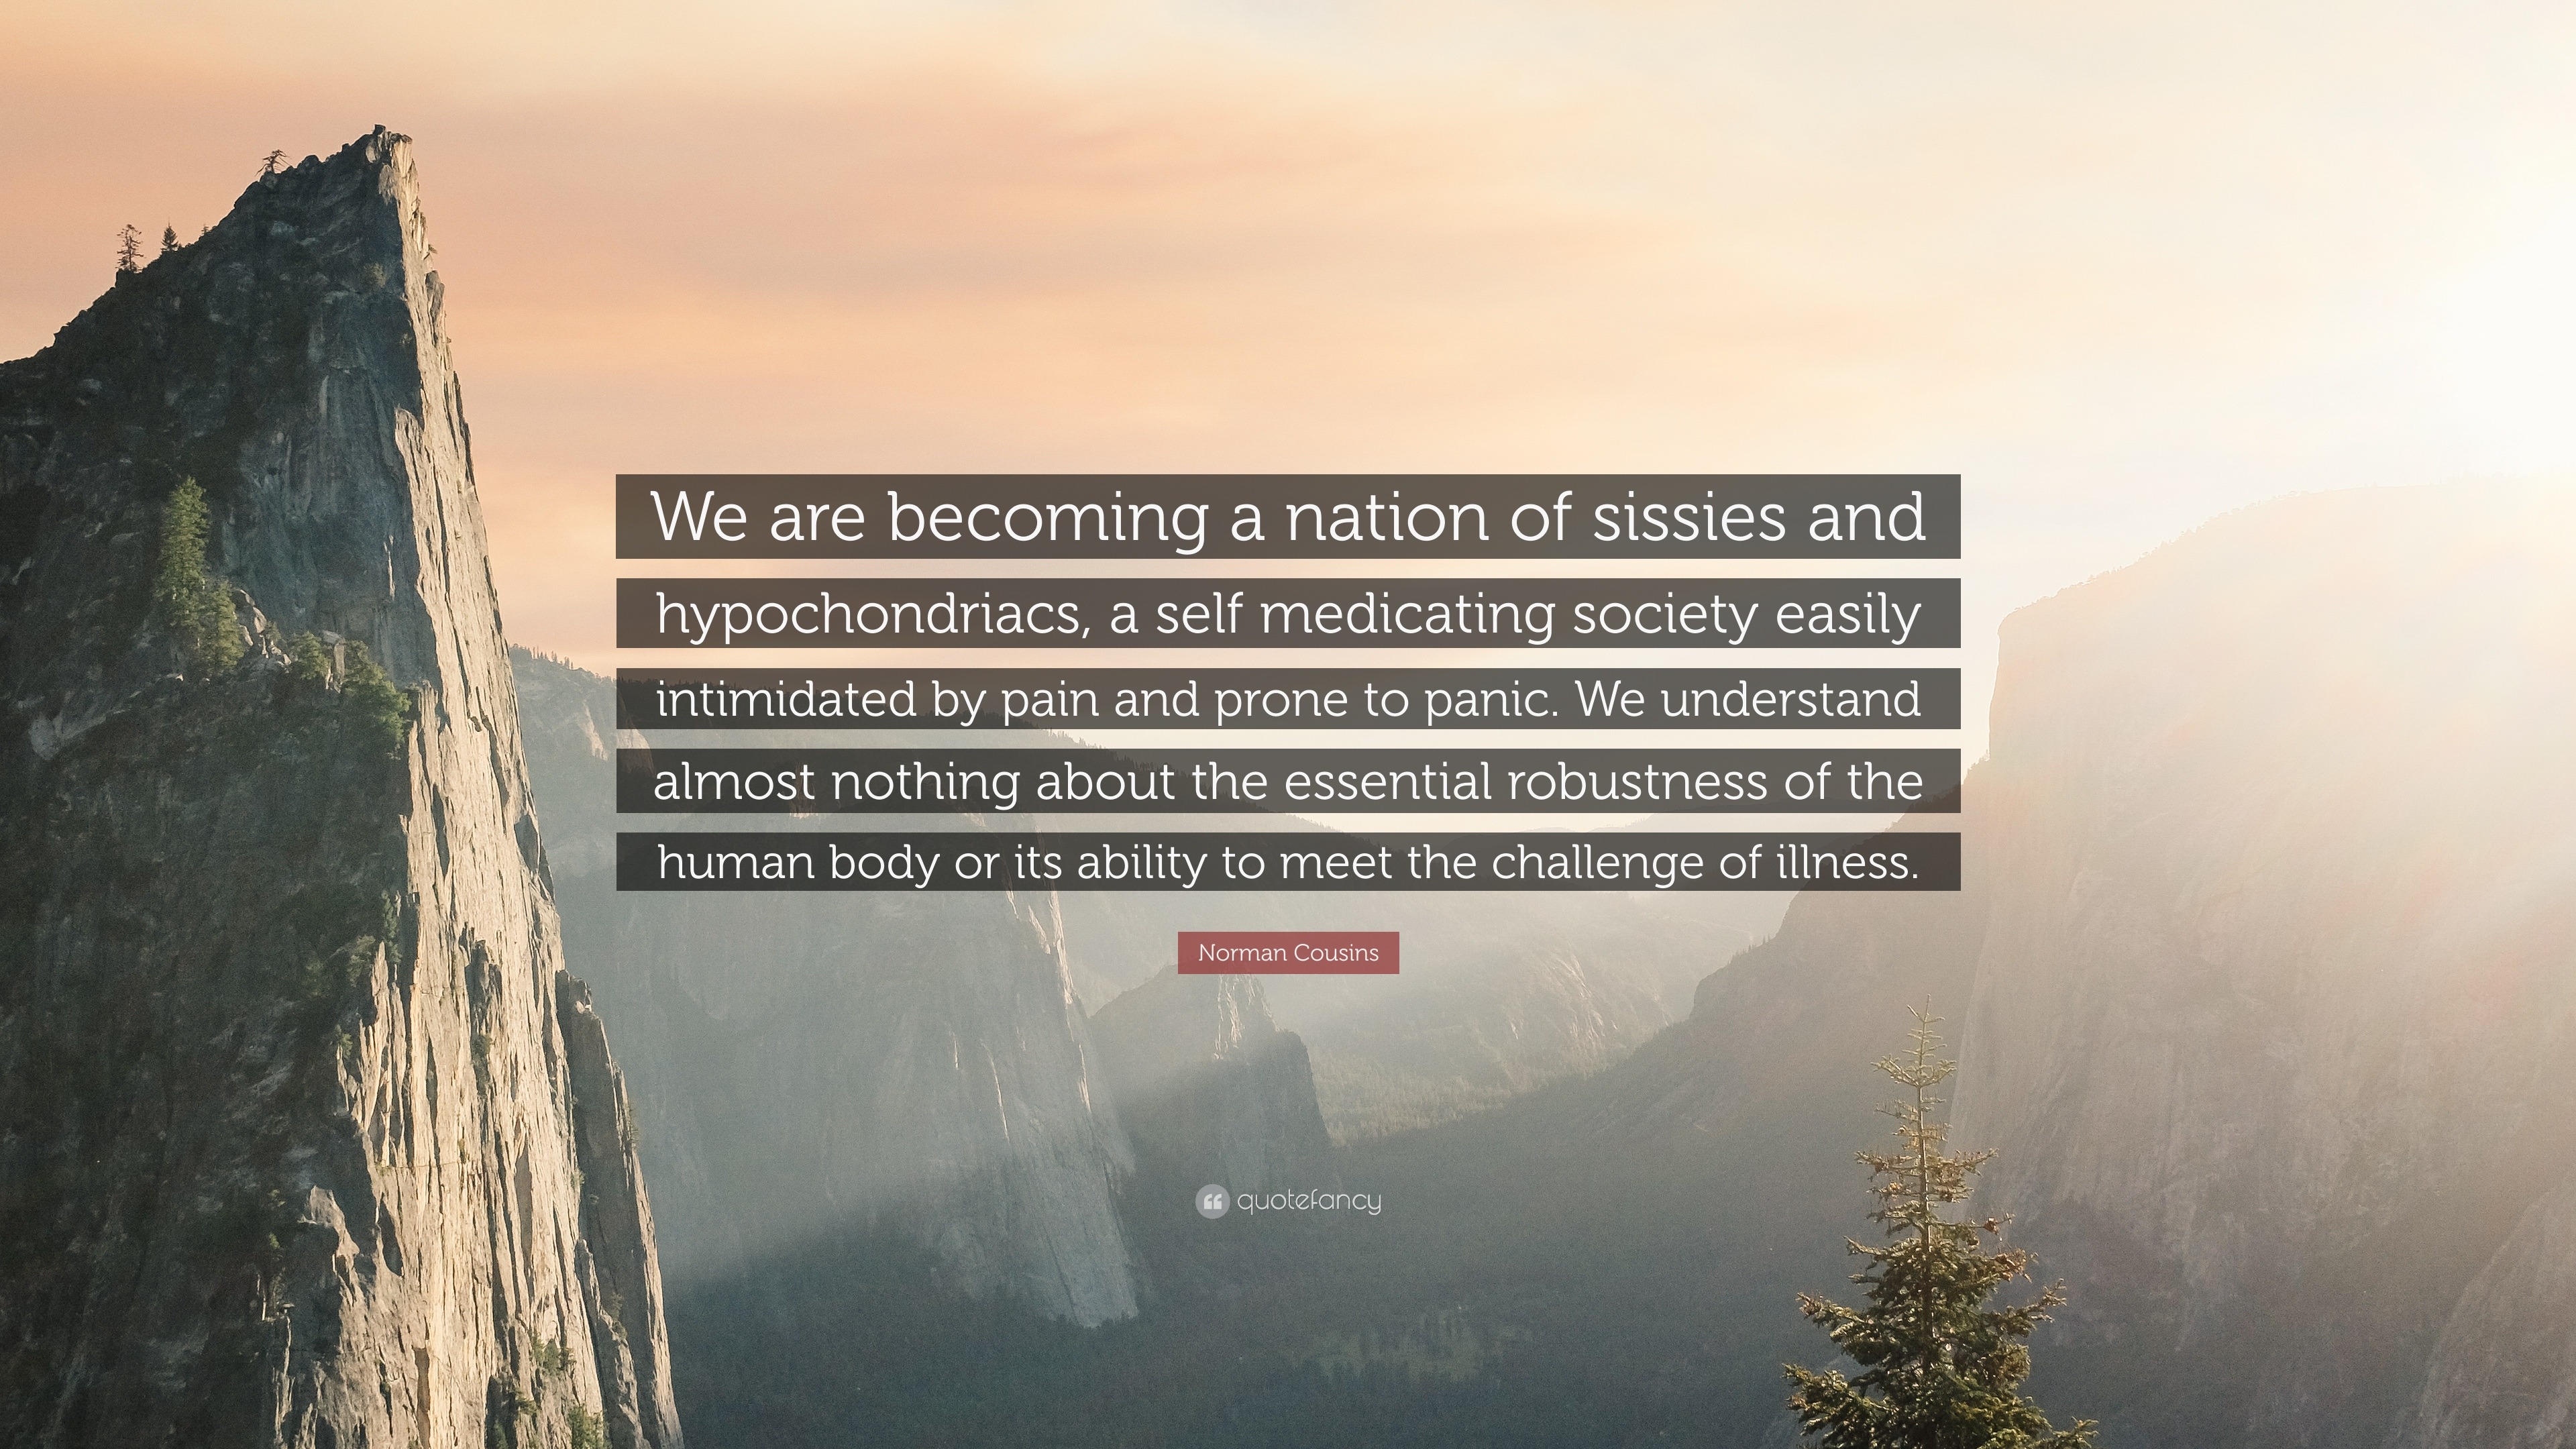 https://quotefancy.com/media/wallpaper/3840x2160/605432-Norman-Cousins-Quote-We-are-becoming-a-nation-of-sissies-and.jpg